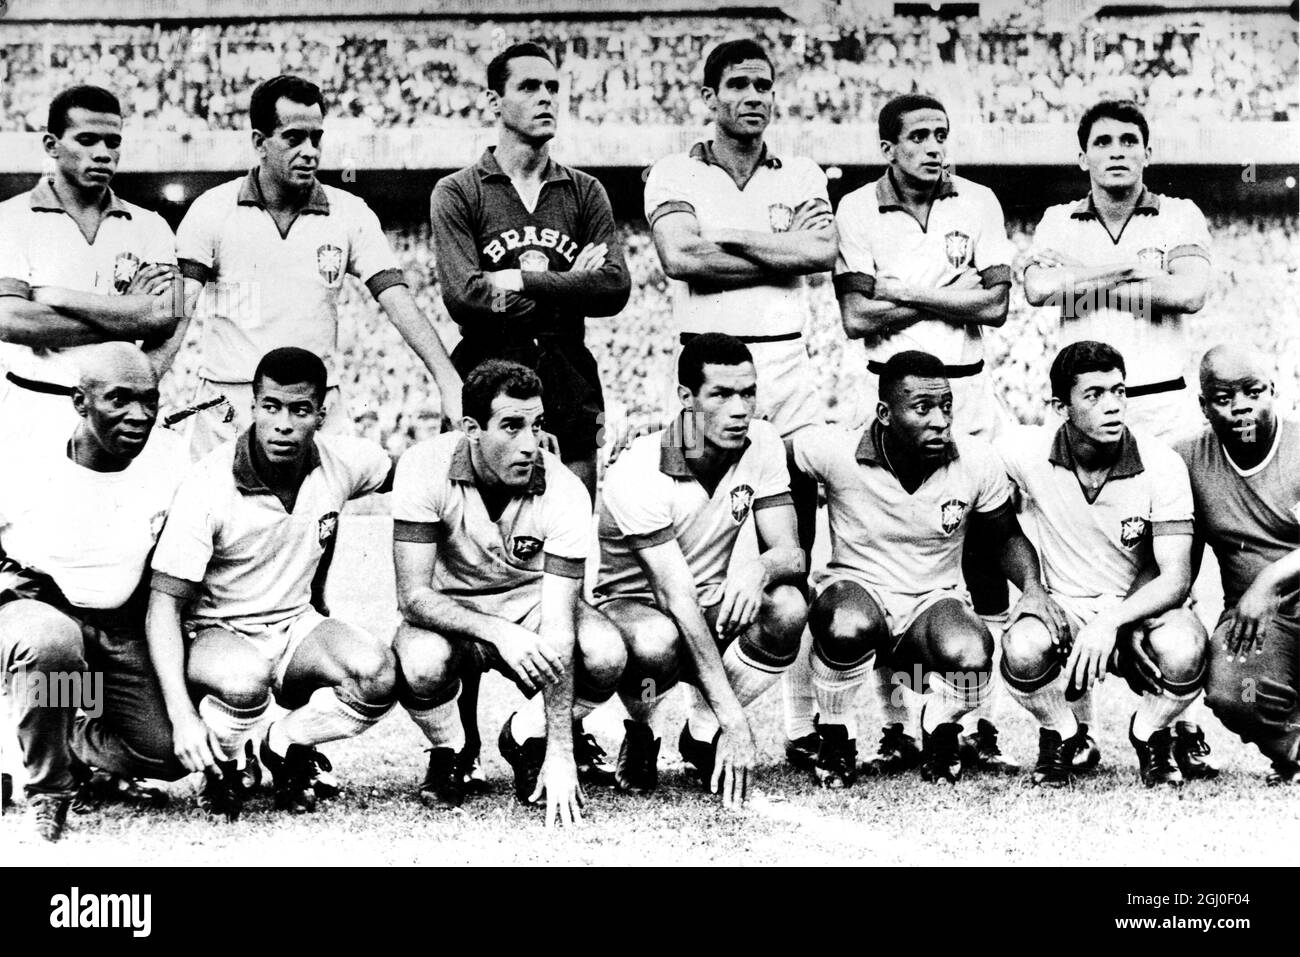 The Brazilian Football team pose before their game in Madrid against Atletico Madrid: Back Row: Fidelis, Paulo Enrique, Gilmar, Brito, Zito and Altair. Front Row: after trainer (left) is Jair, Gerson, Servilio, Pele and Amarildo 24th June 1966. Stock Photo